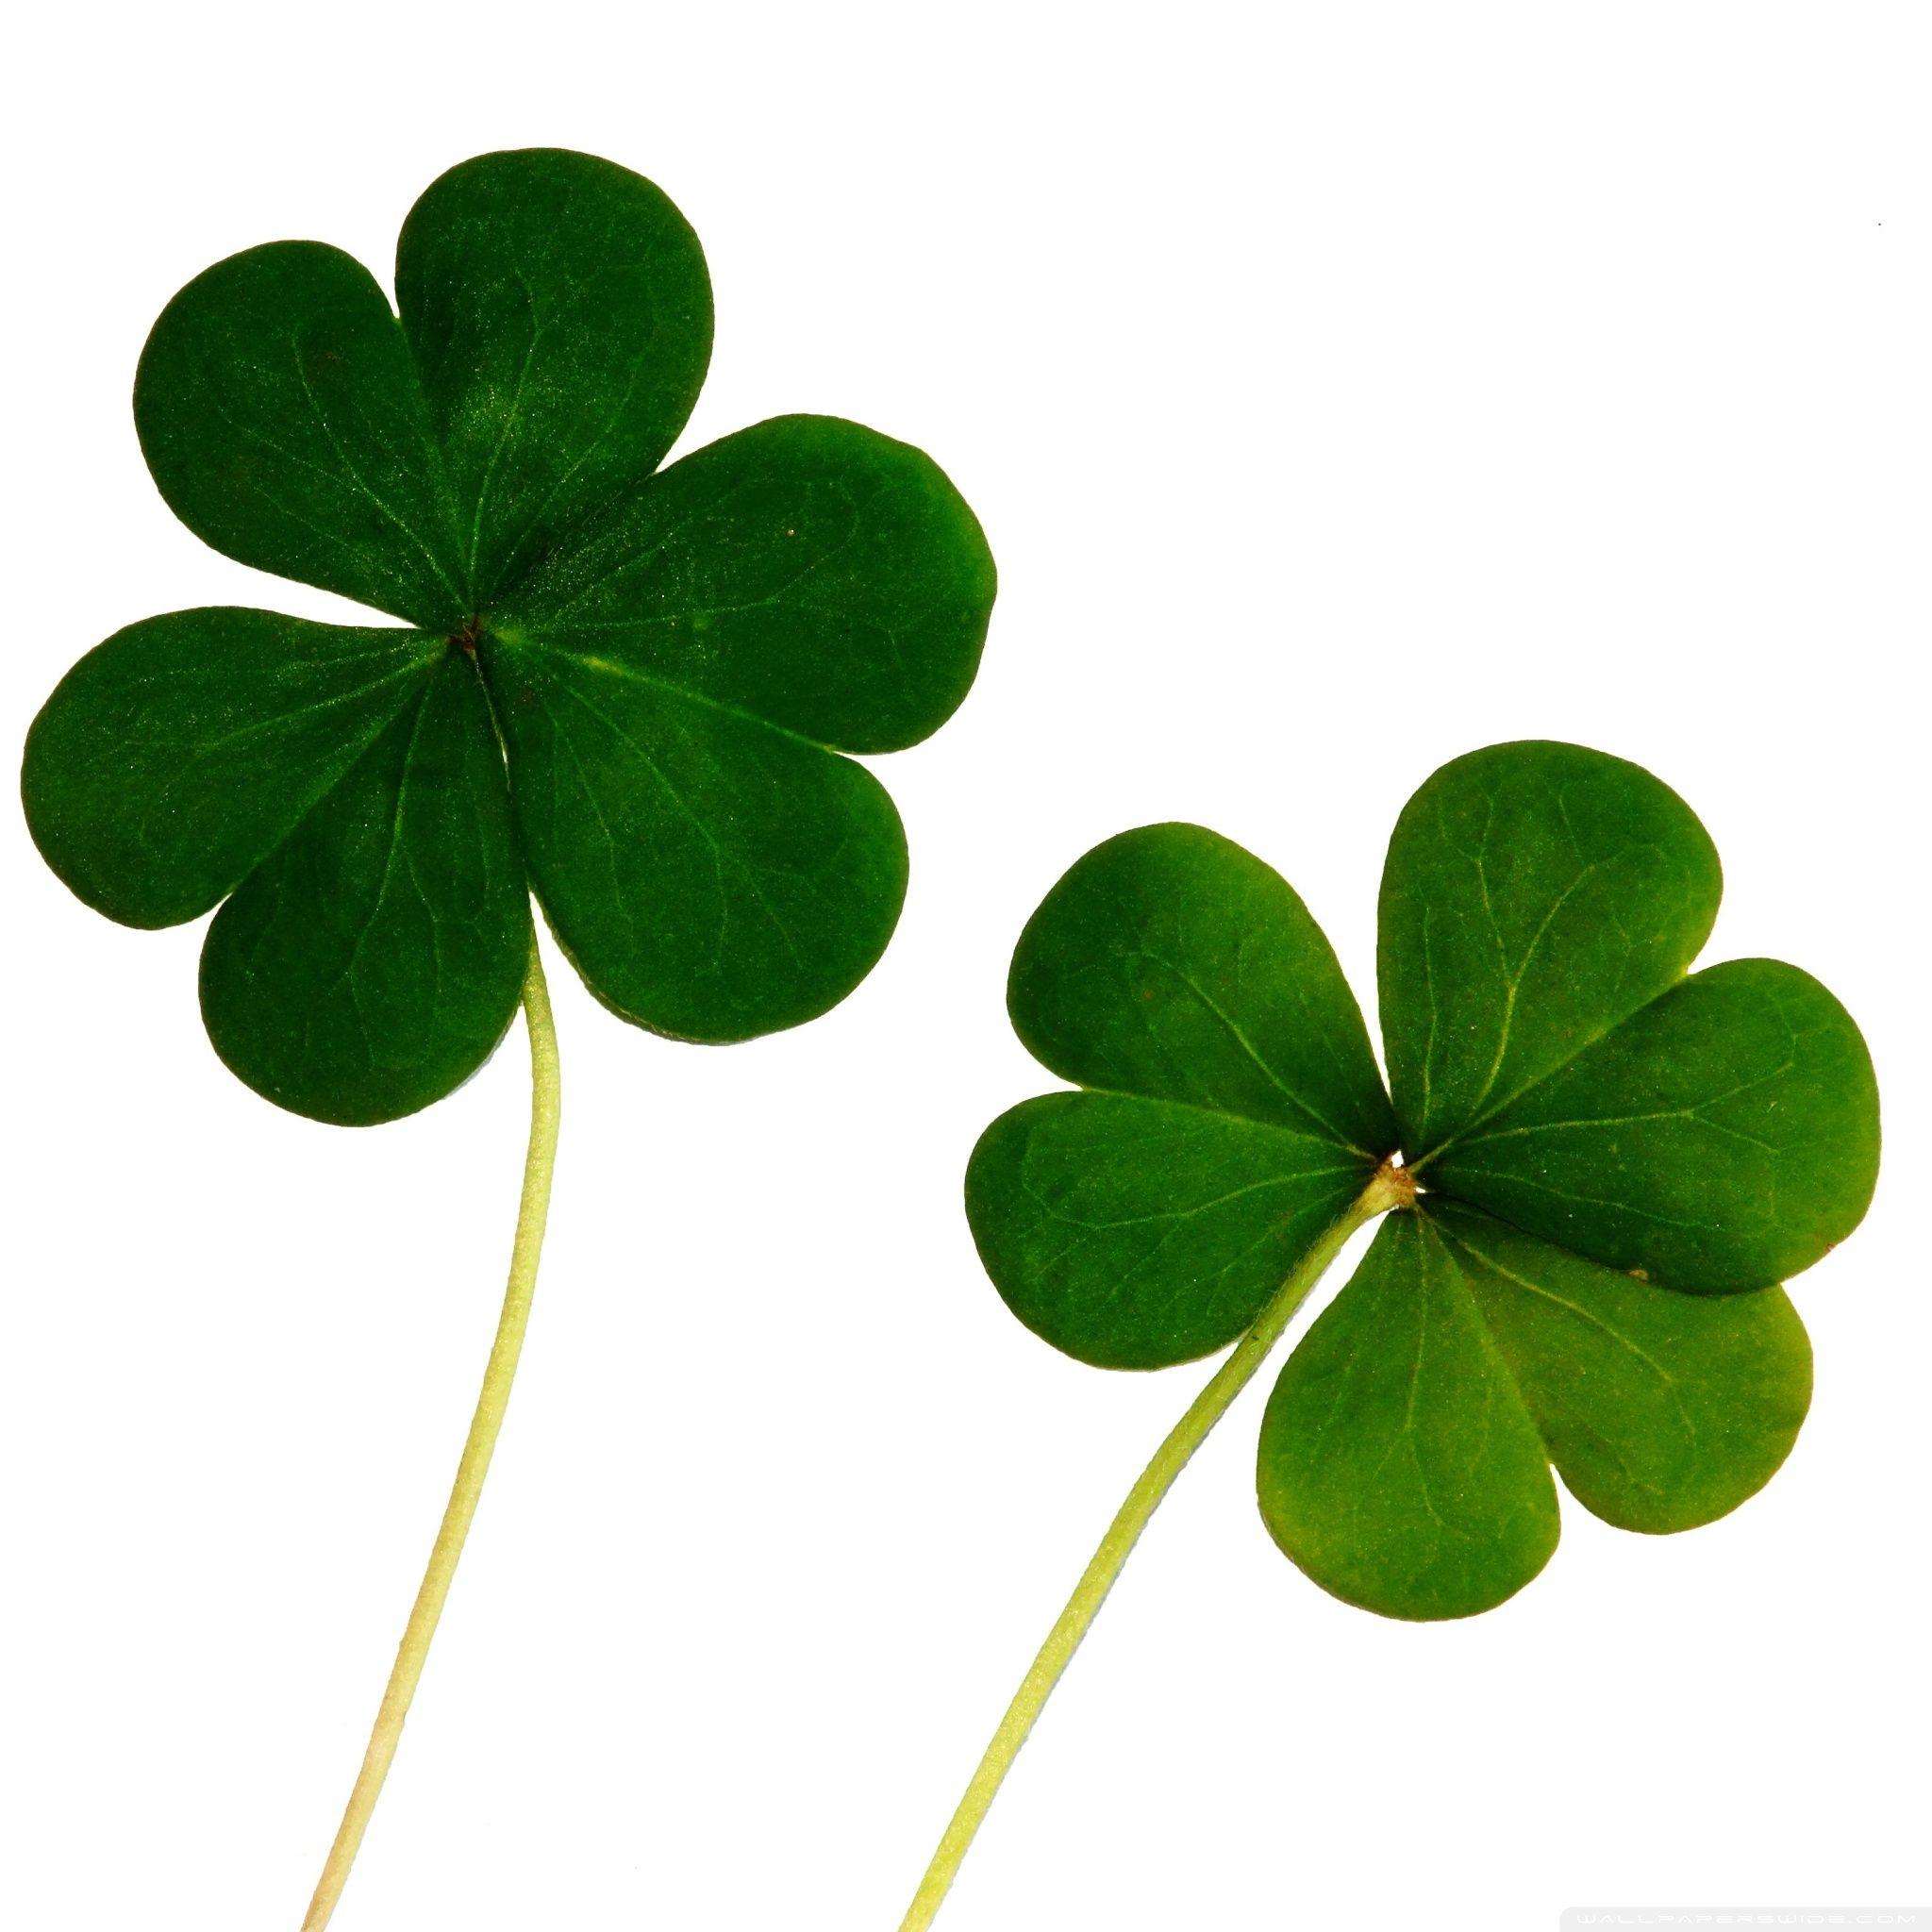 Good Luck Background Images HD Pictures and Wallpaper For Free Download   Pngtree